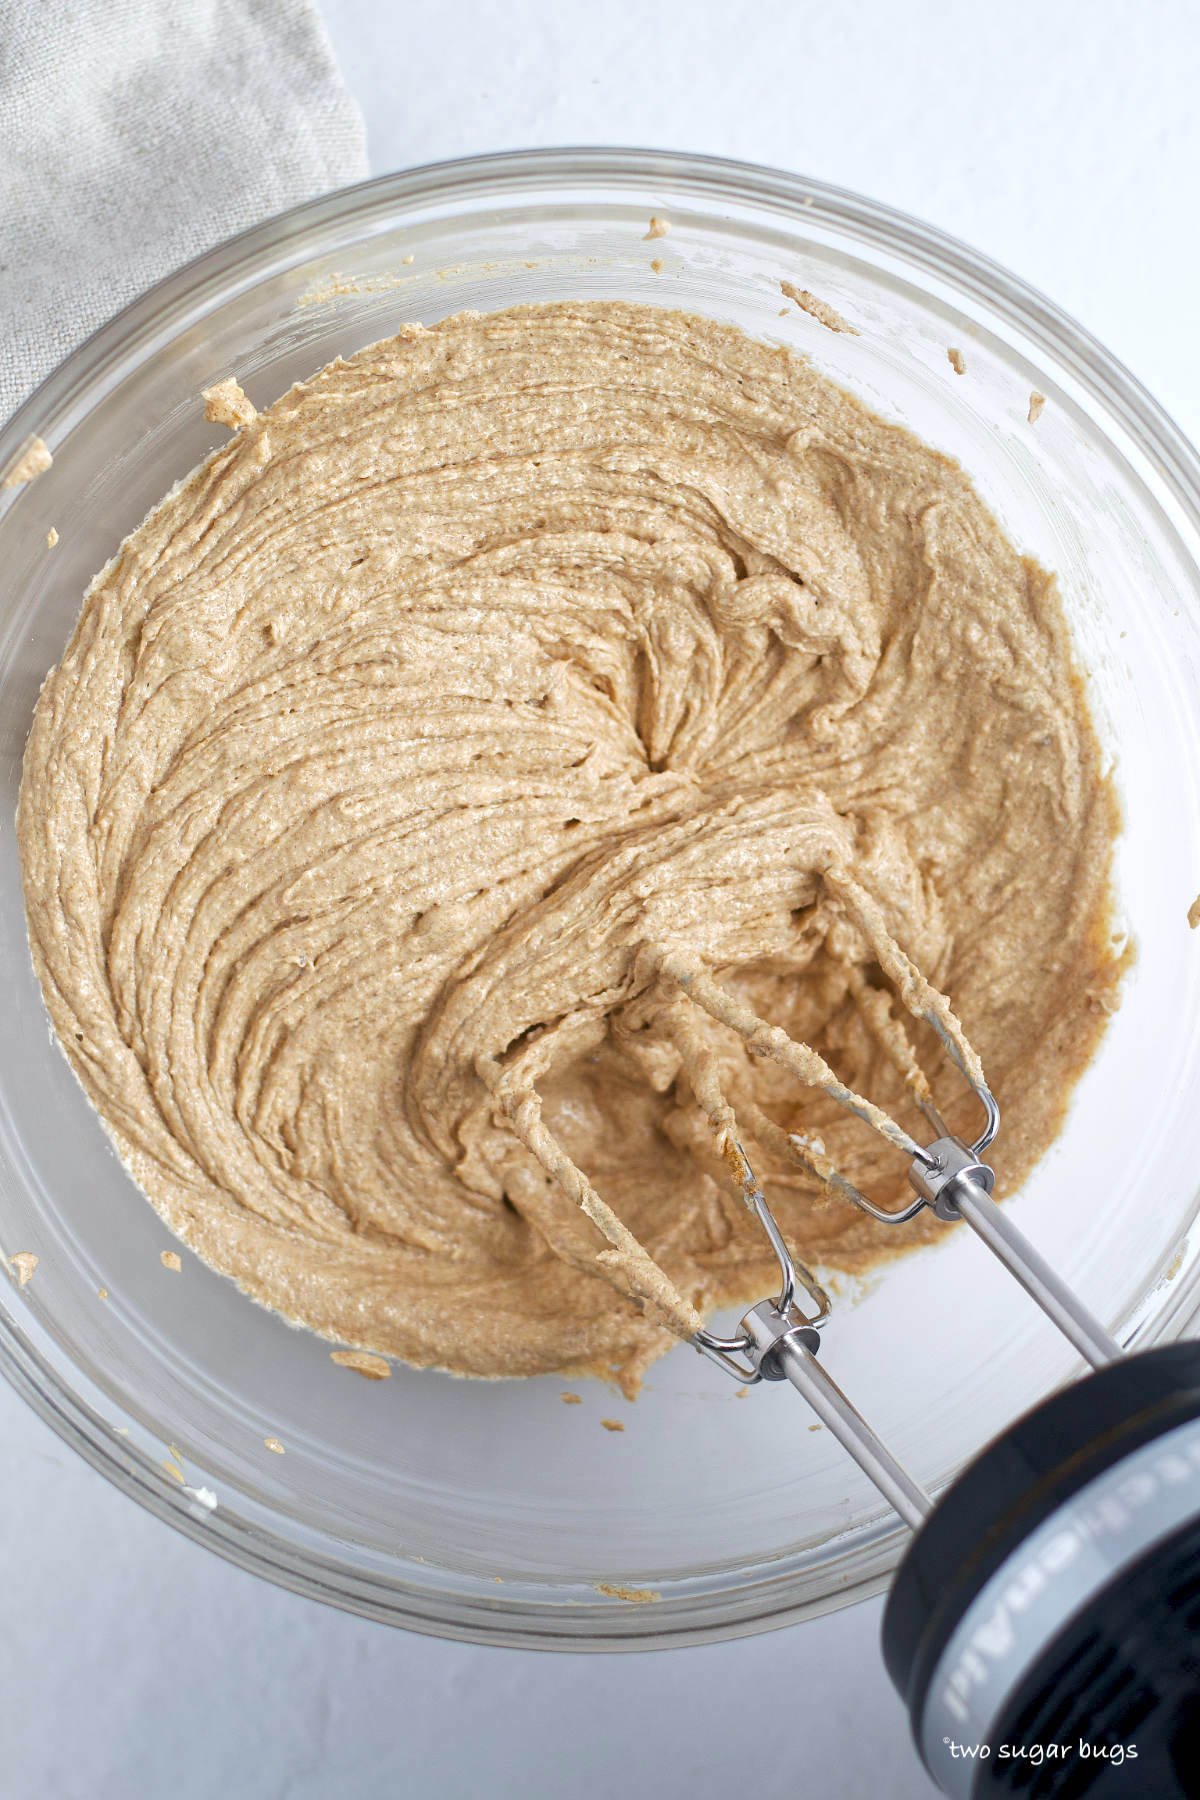 sugar, butter and peanut butter creamed in a mixing bowl